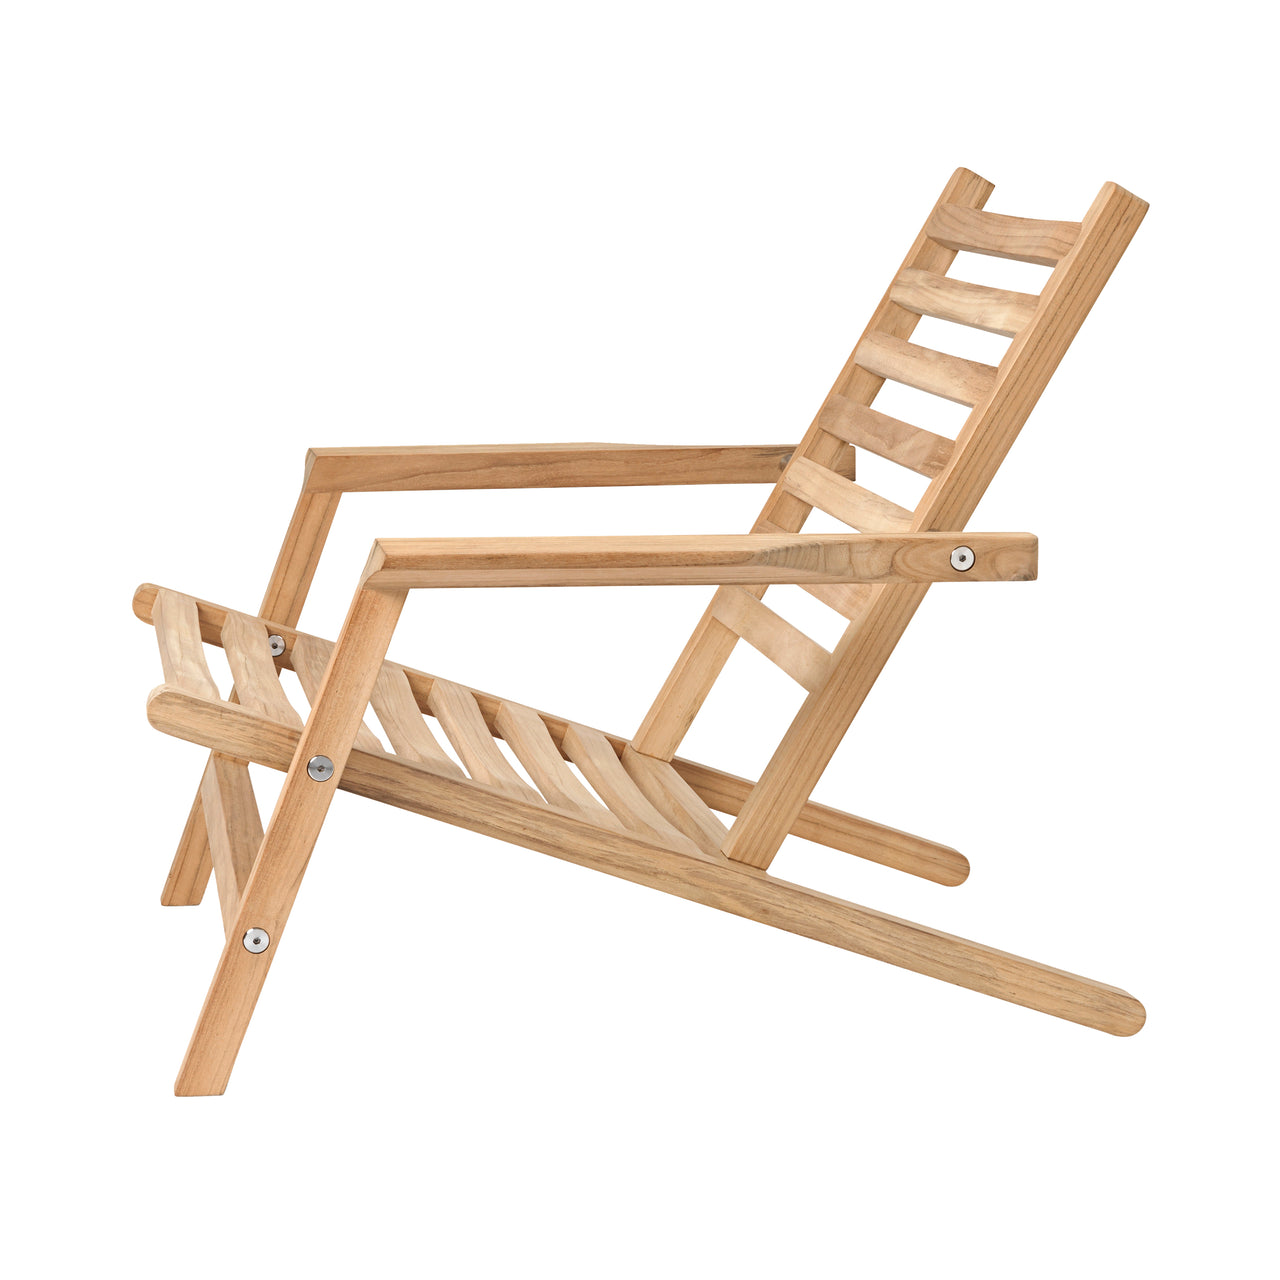 AH603 Outdoor Deck Chair: Without Cushion